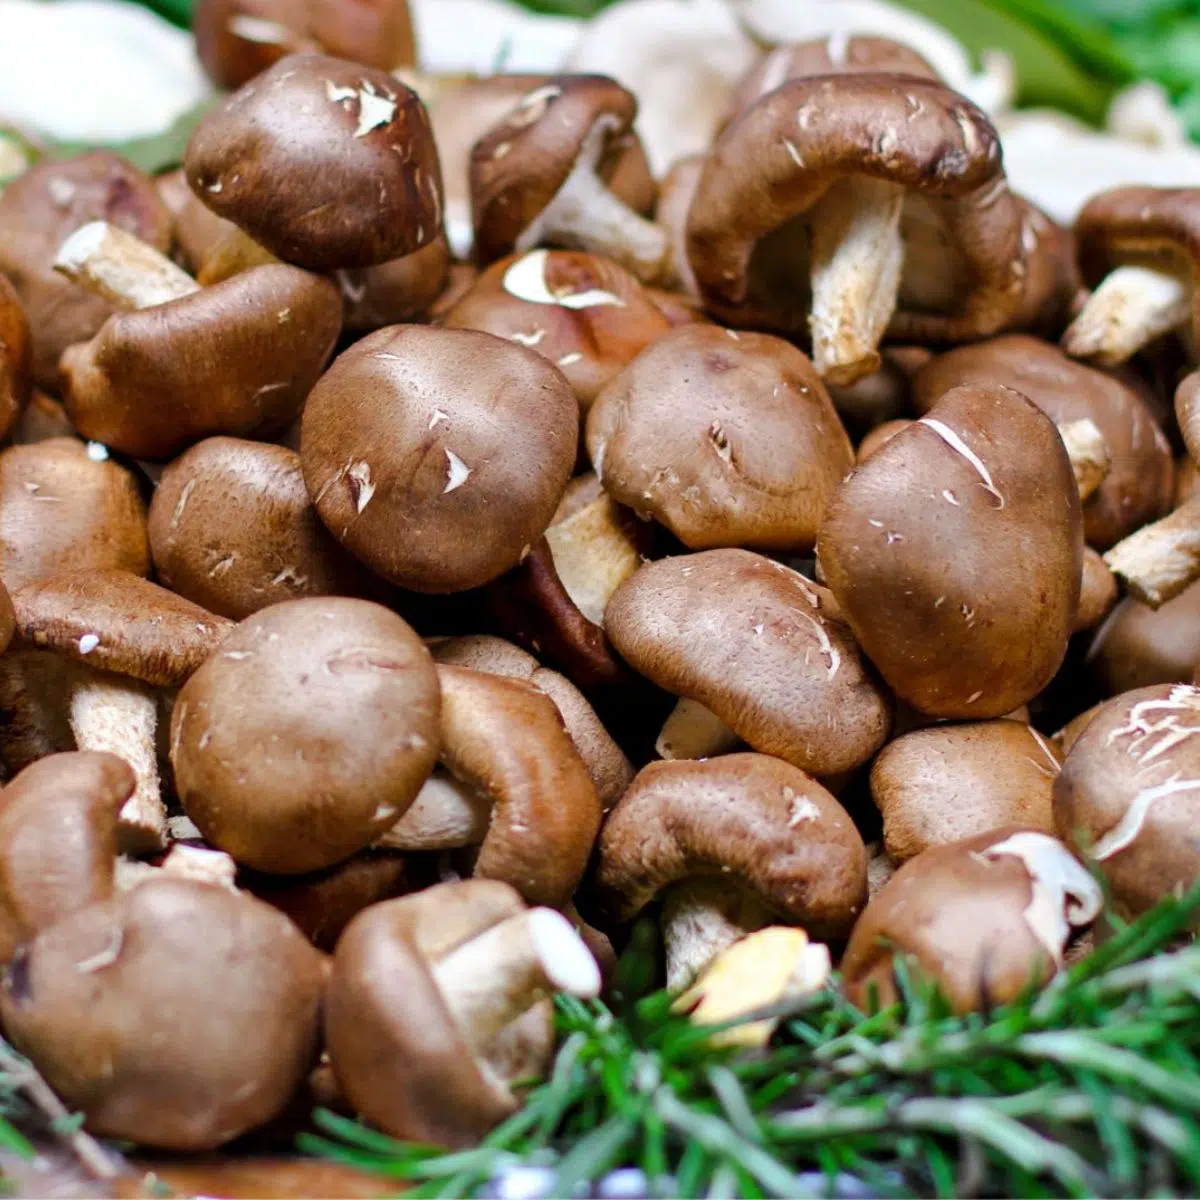 Best cremini mushroom substitute ideas and alternatives to use in cooking featuring fresh baby bella mushrooms with herbs.